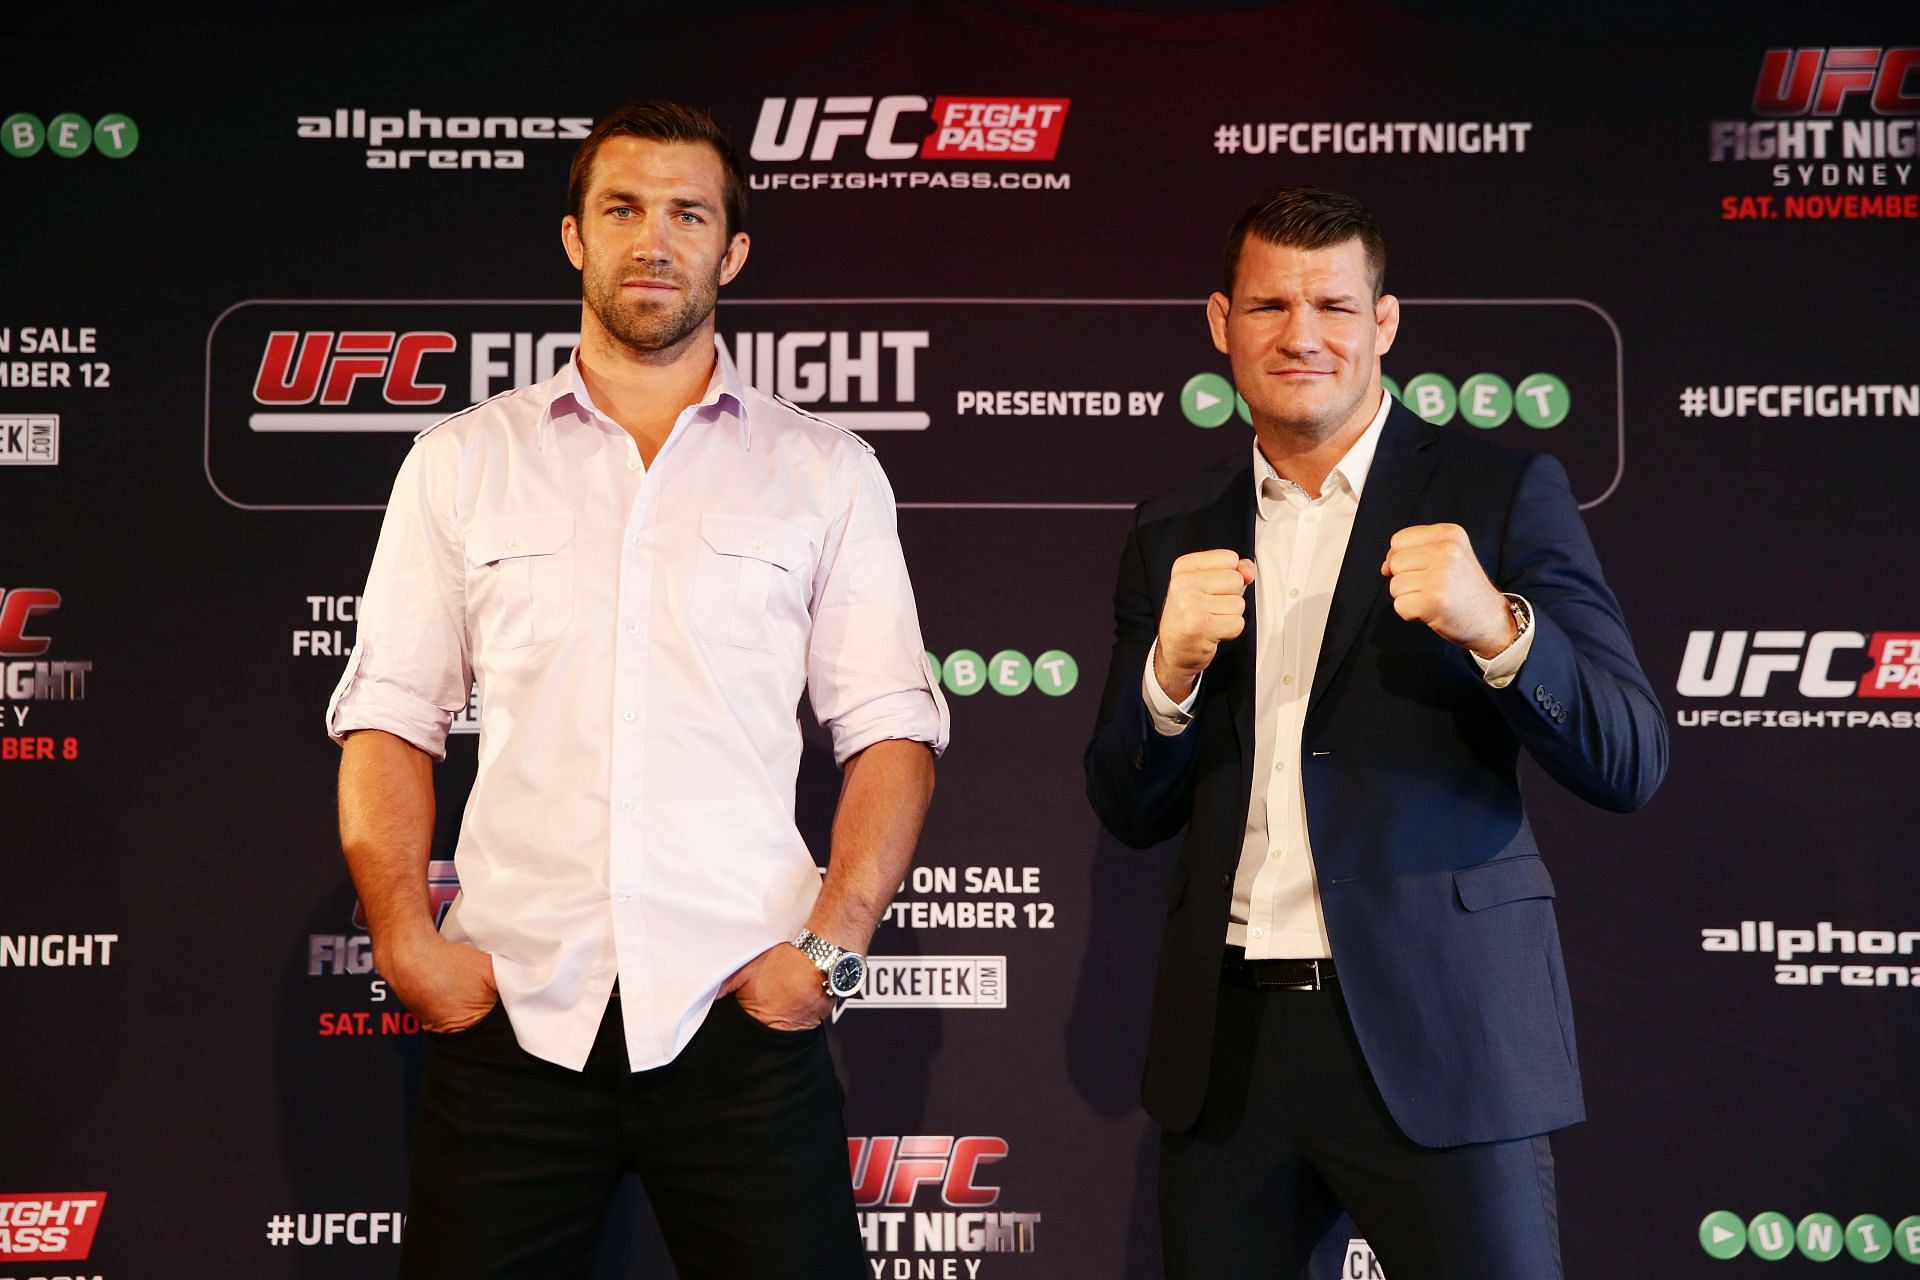 Luke Rockhold (left) and Michael Bisping (right)(Image via Getty)